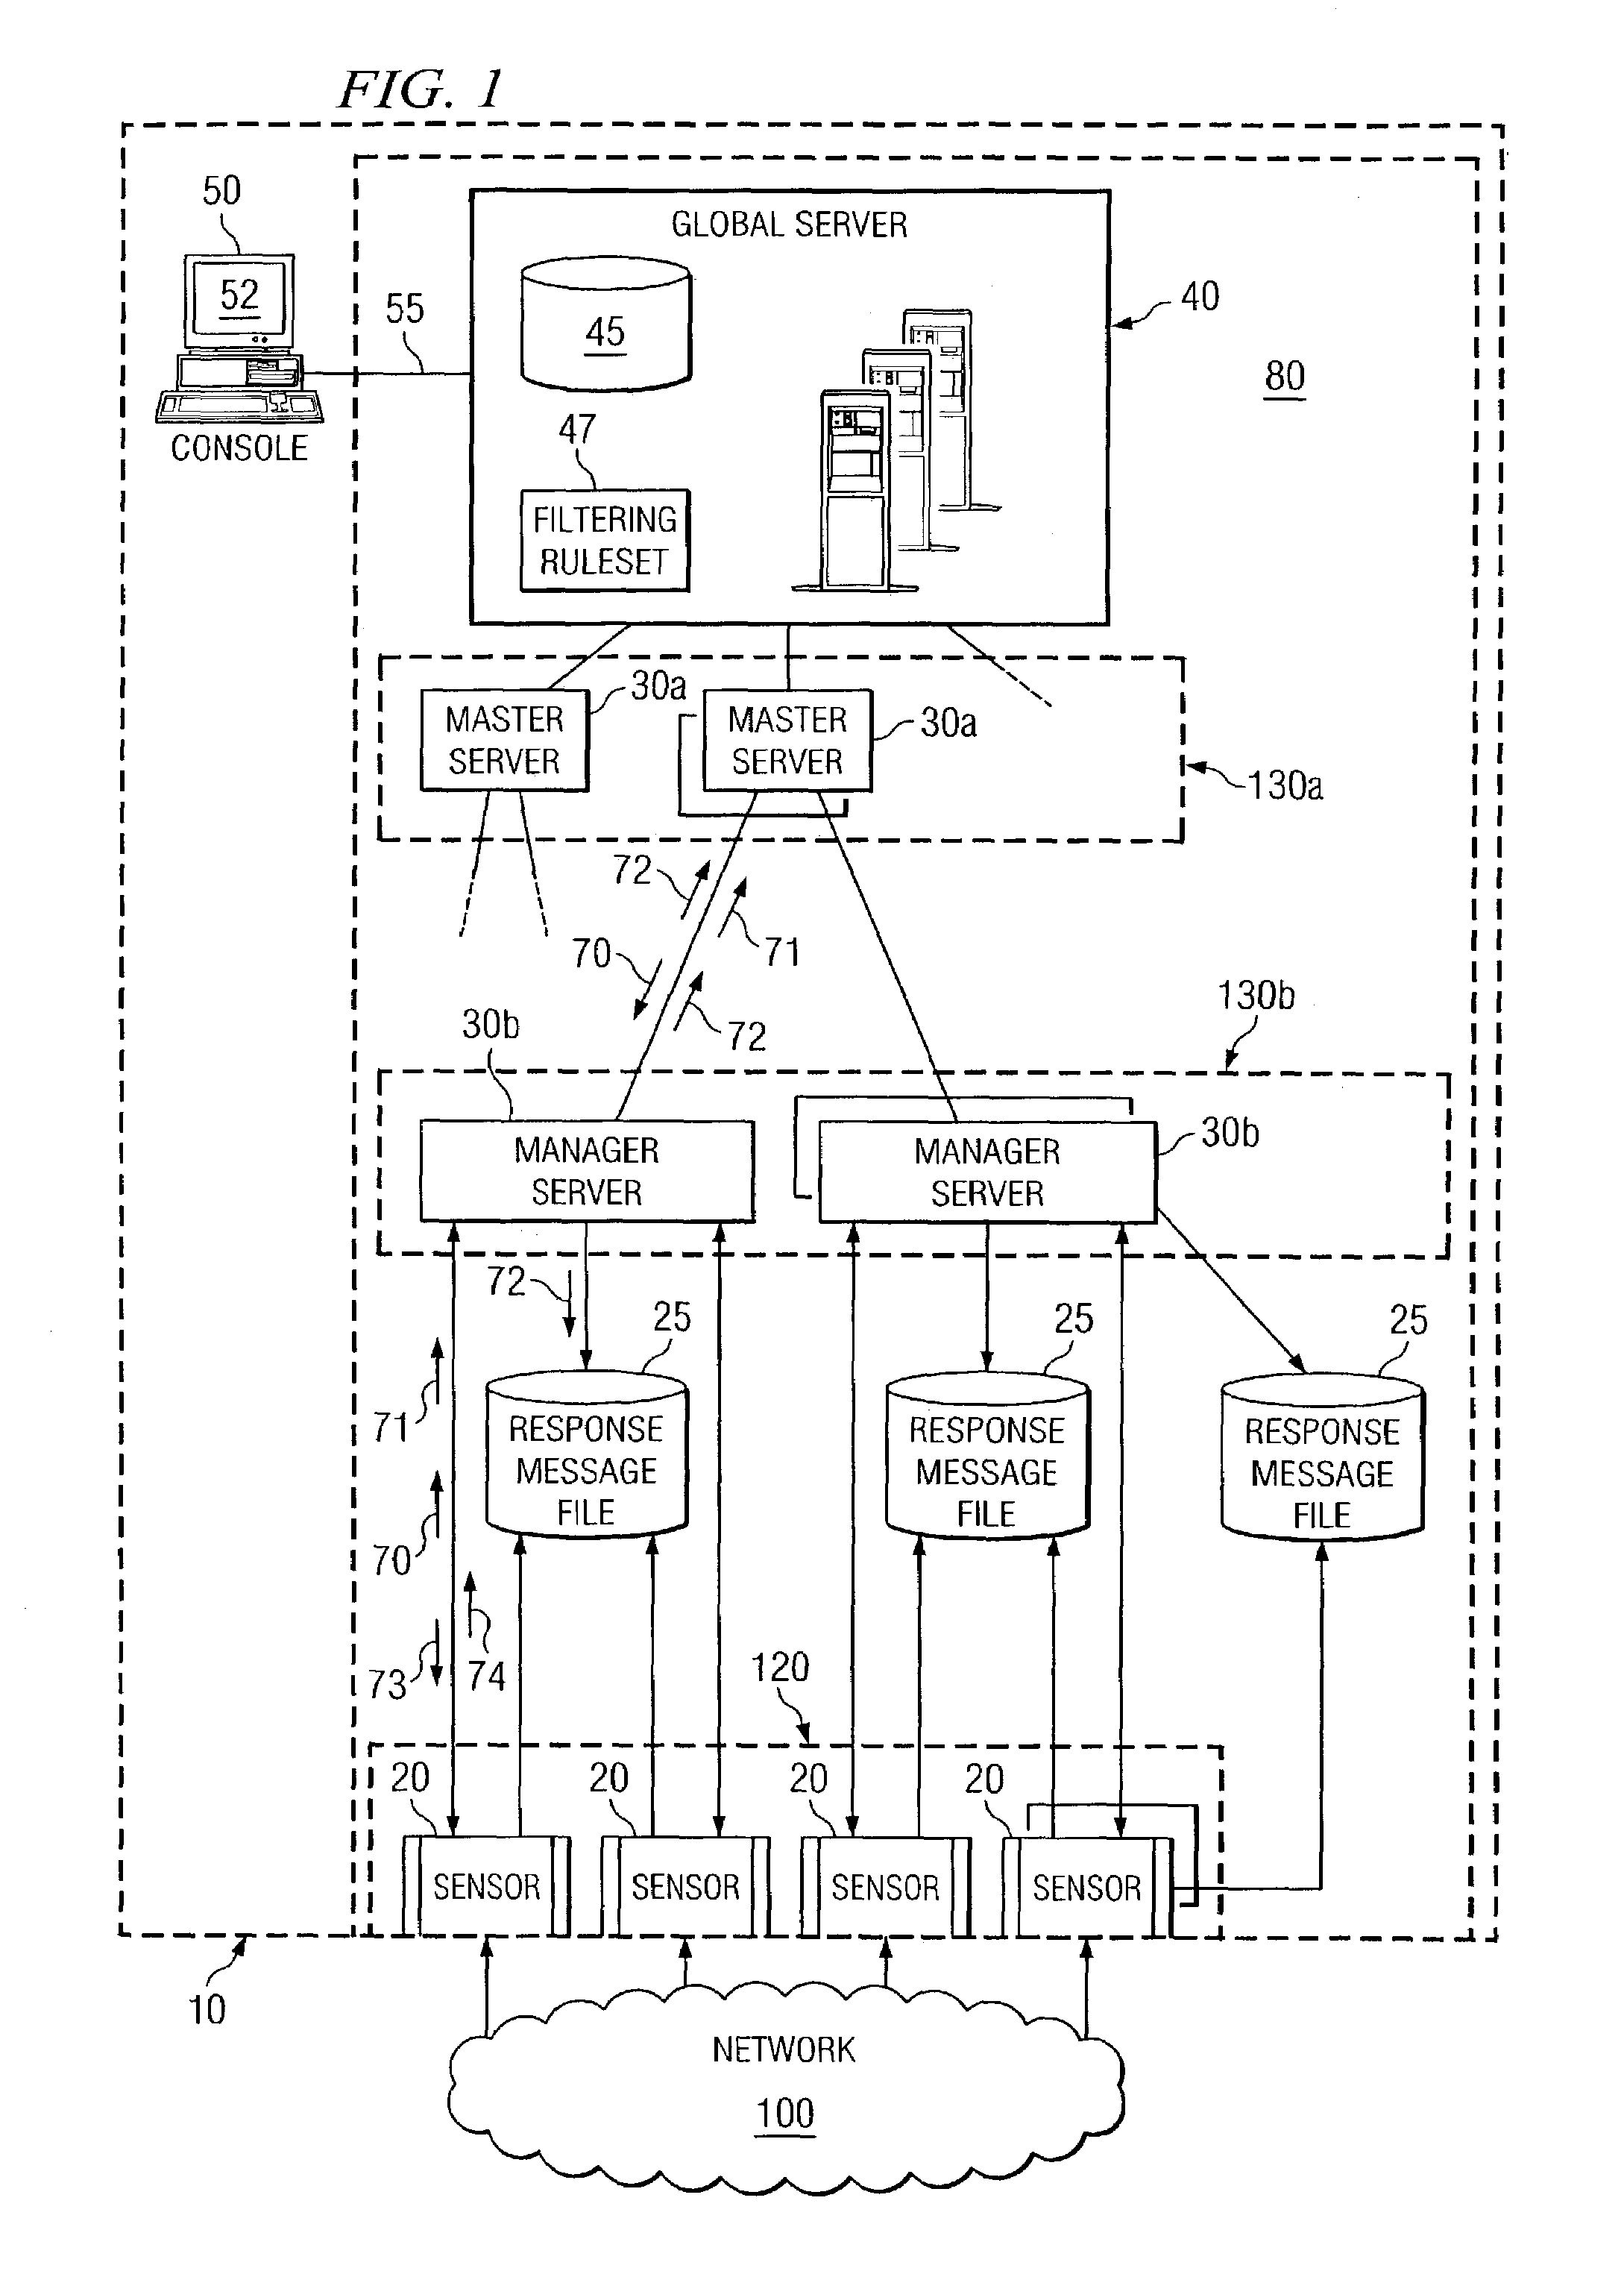 Graphical user interface for an enterprise intrusion detection system